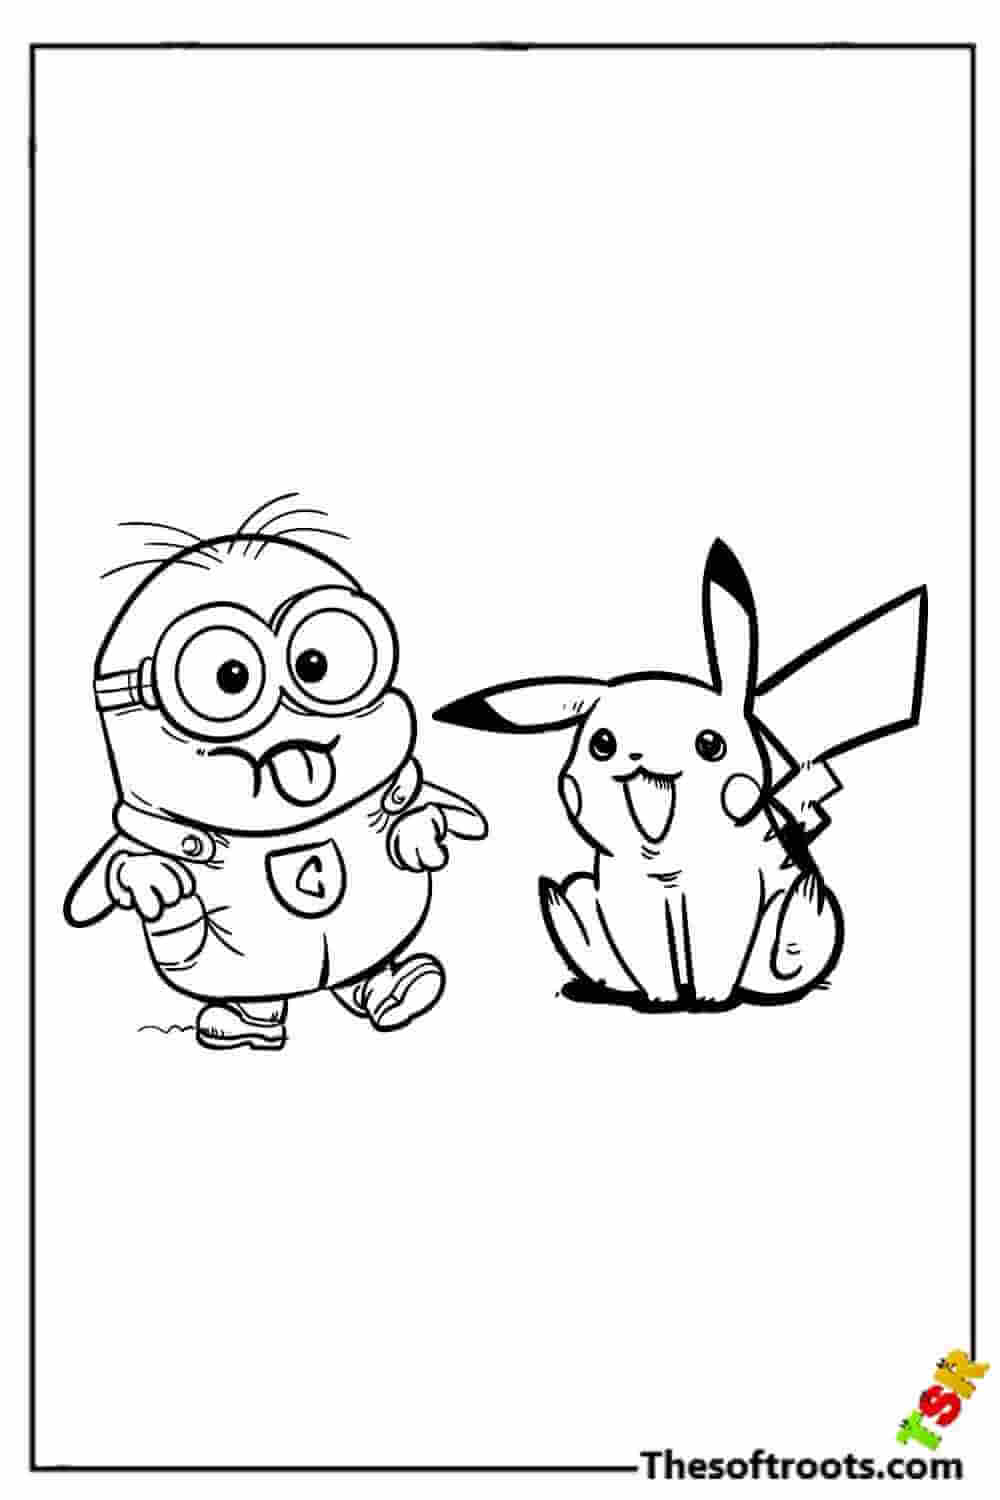 Pikachu and Minion coloring pages